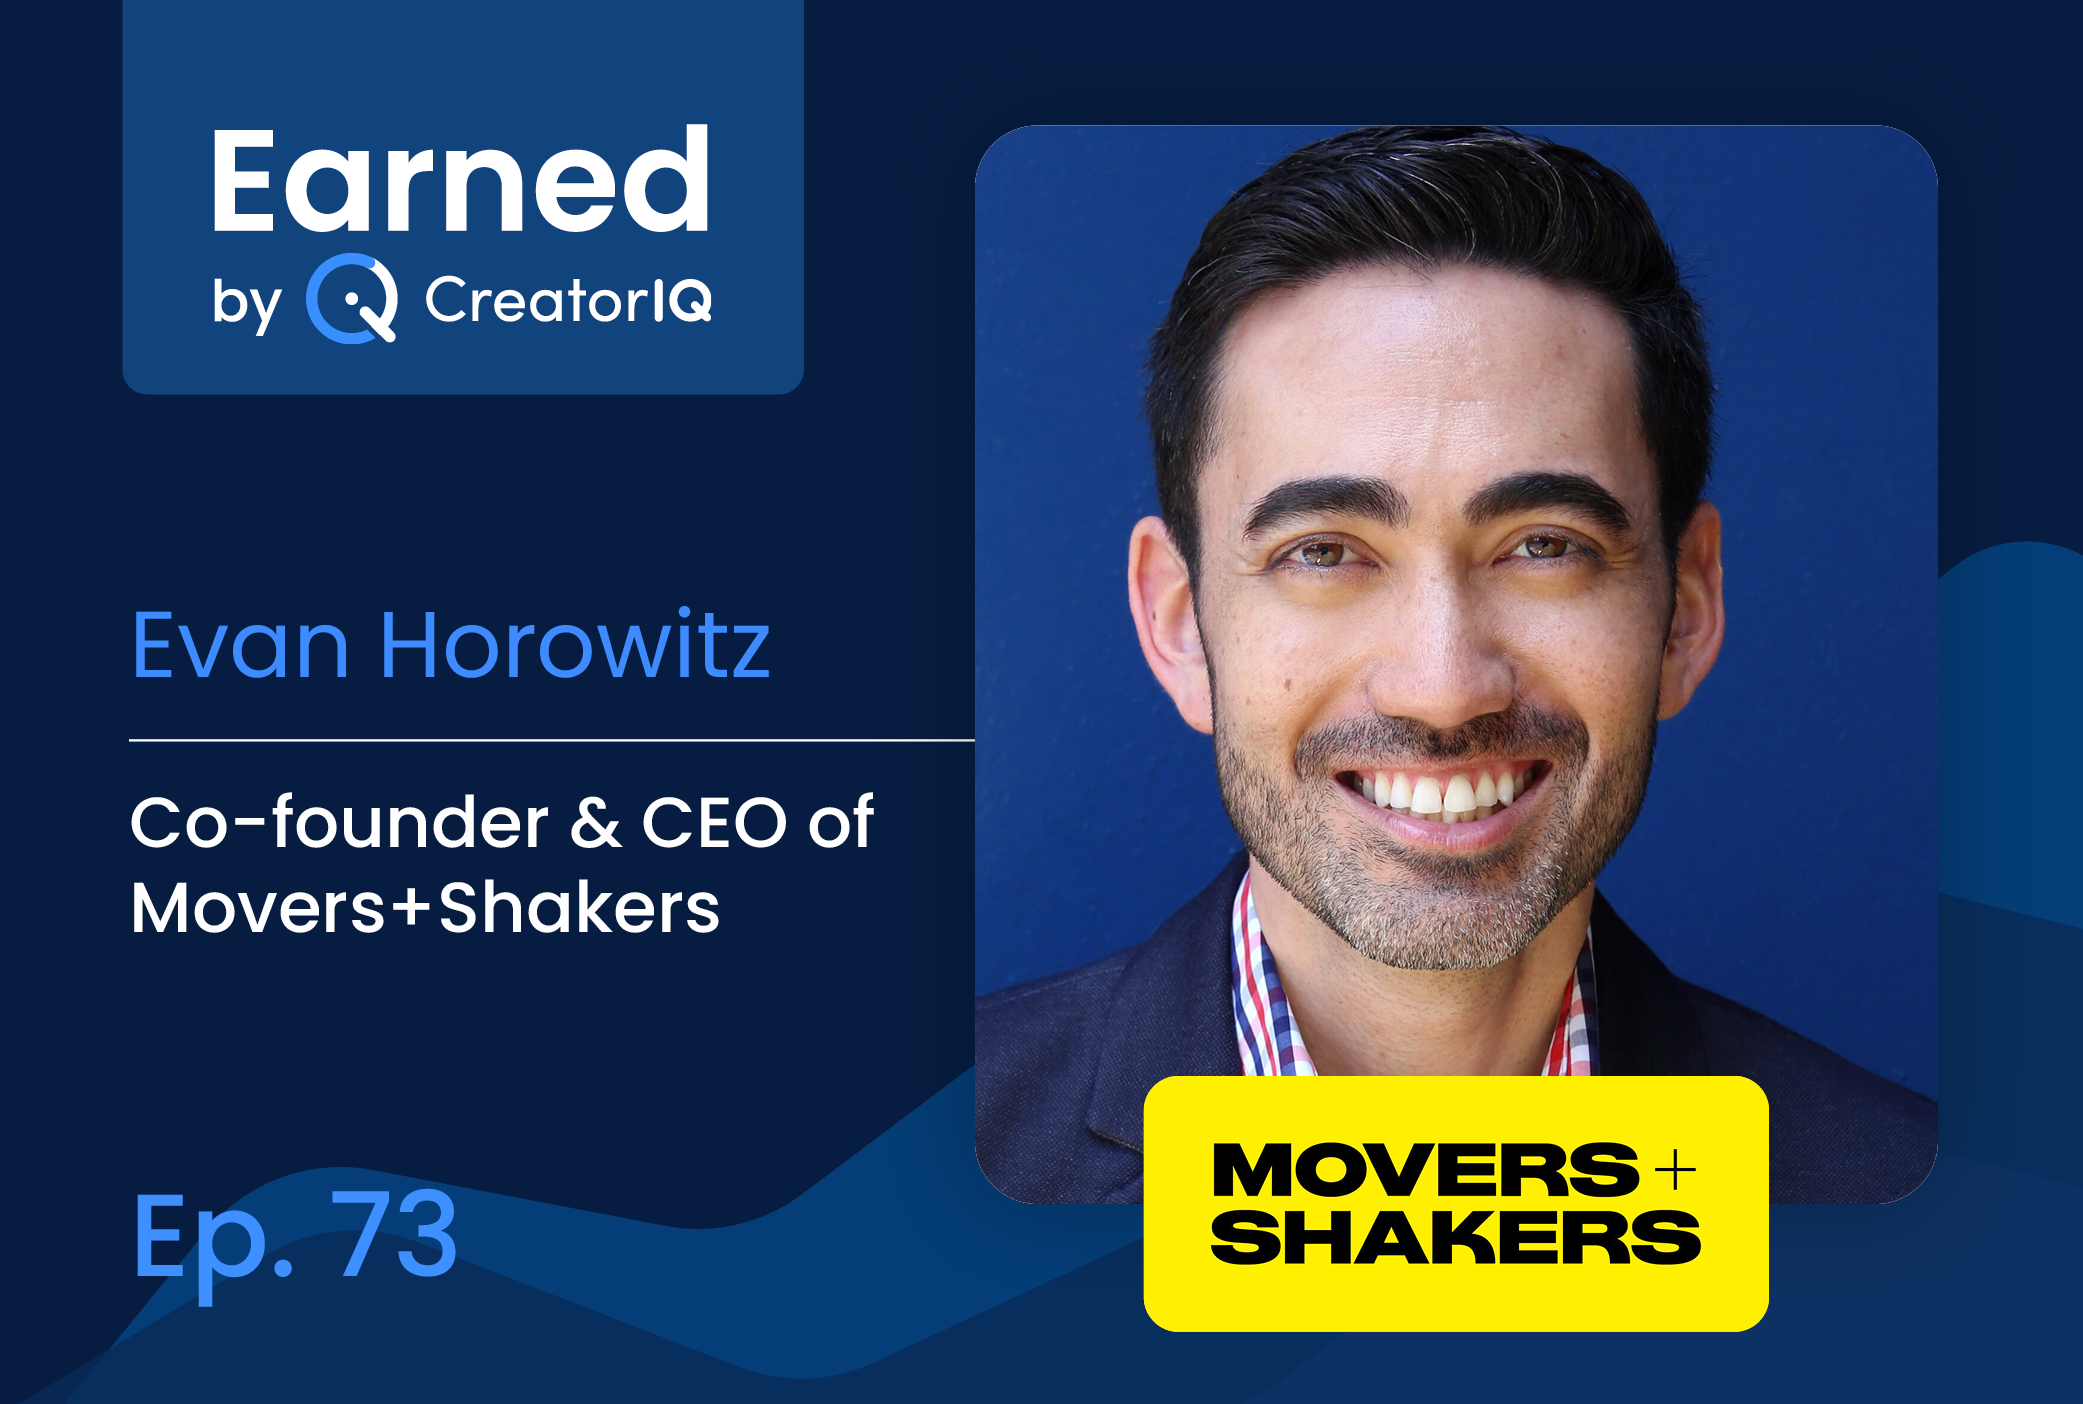 Movers+Shakers CEO Evan Horowitz Talks Building Today’s Fastest-Growing Creative Agency and Connecting Brands to Culture